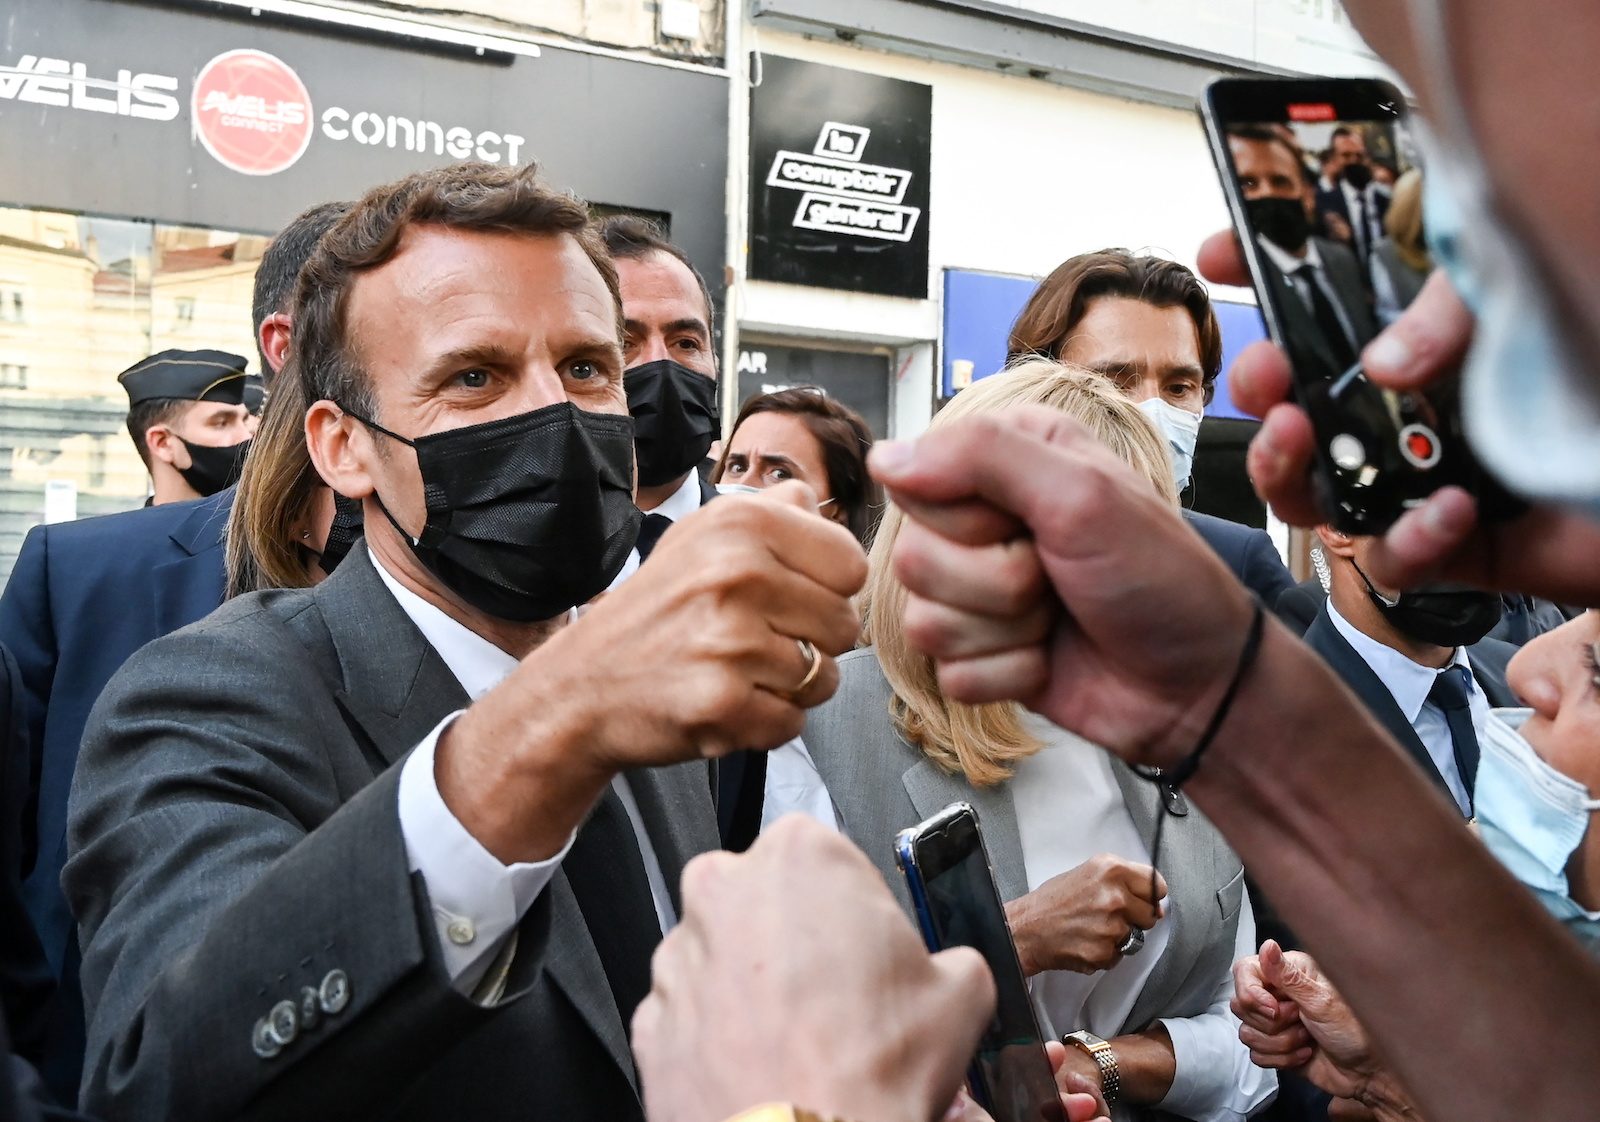 French court gives man who slapped Macron 4 months in jail